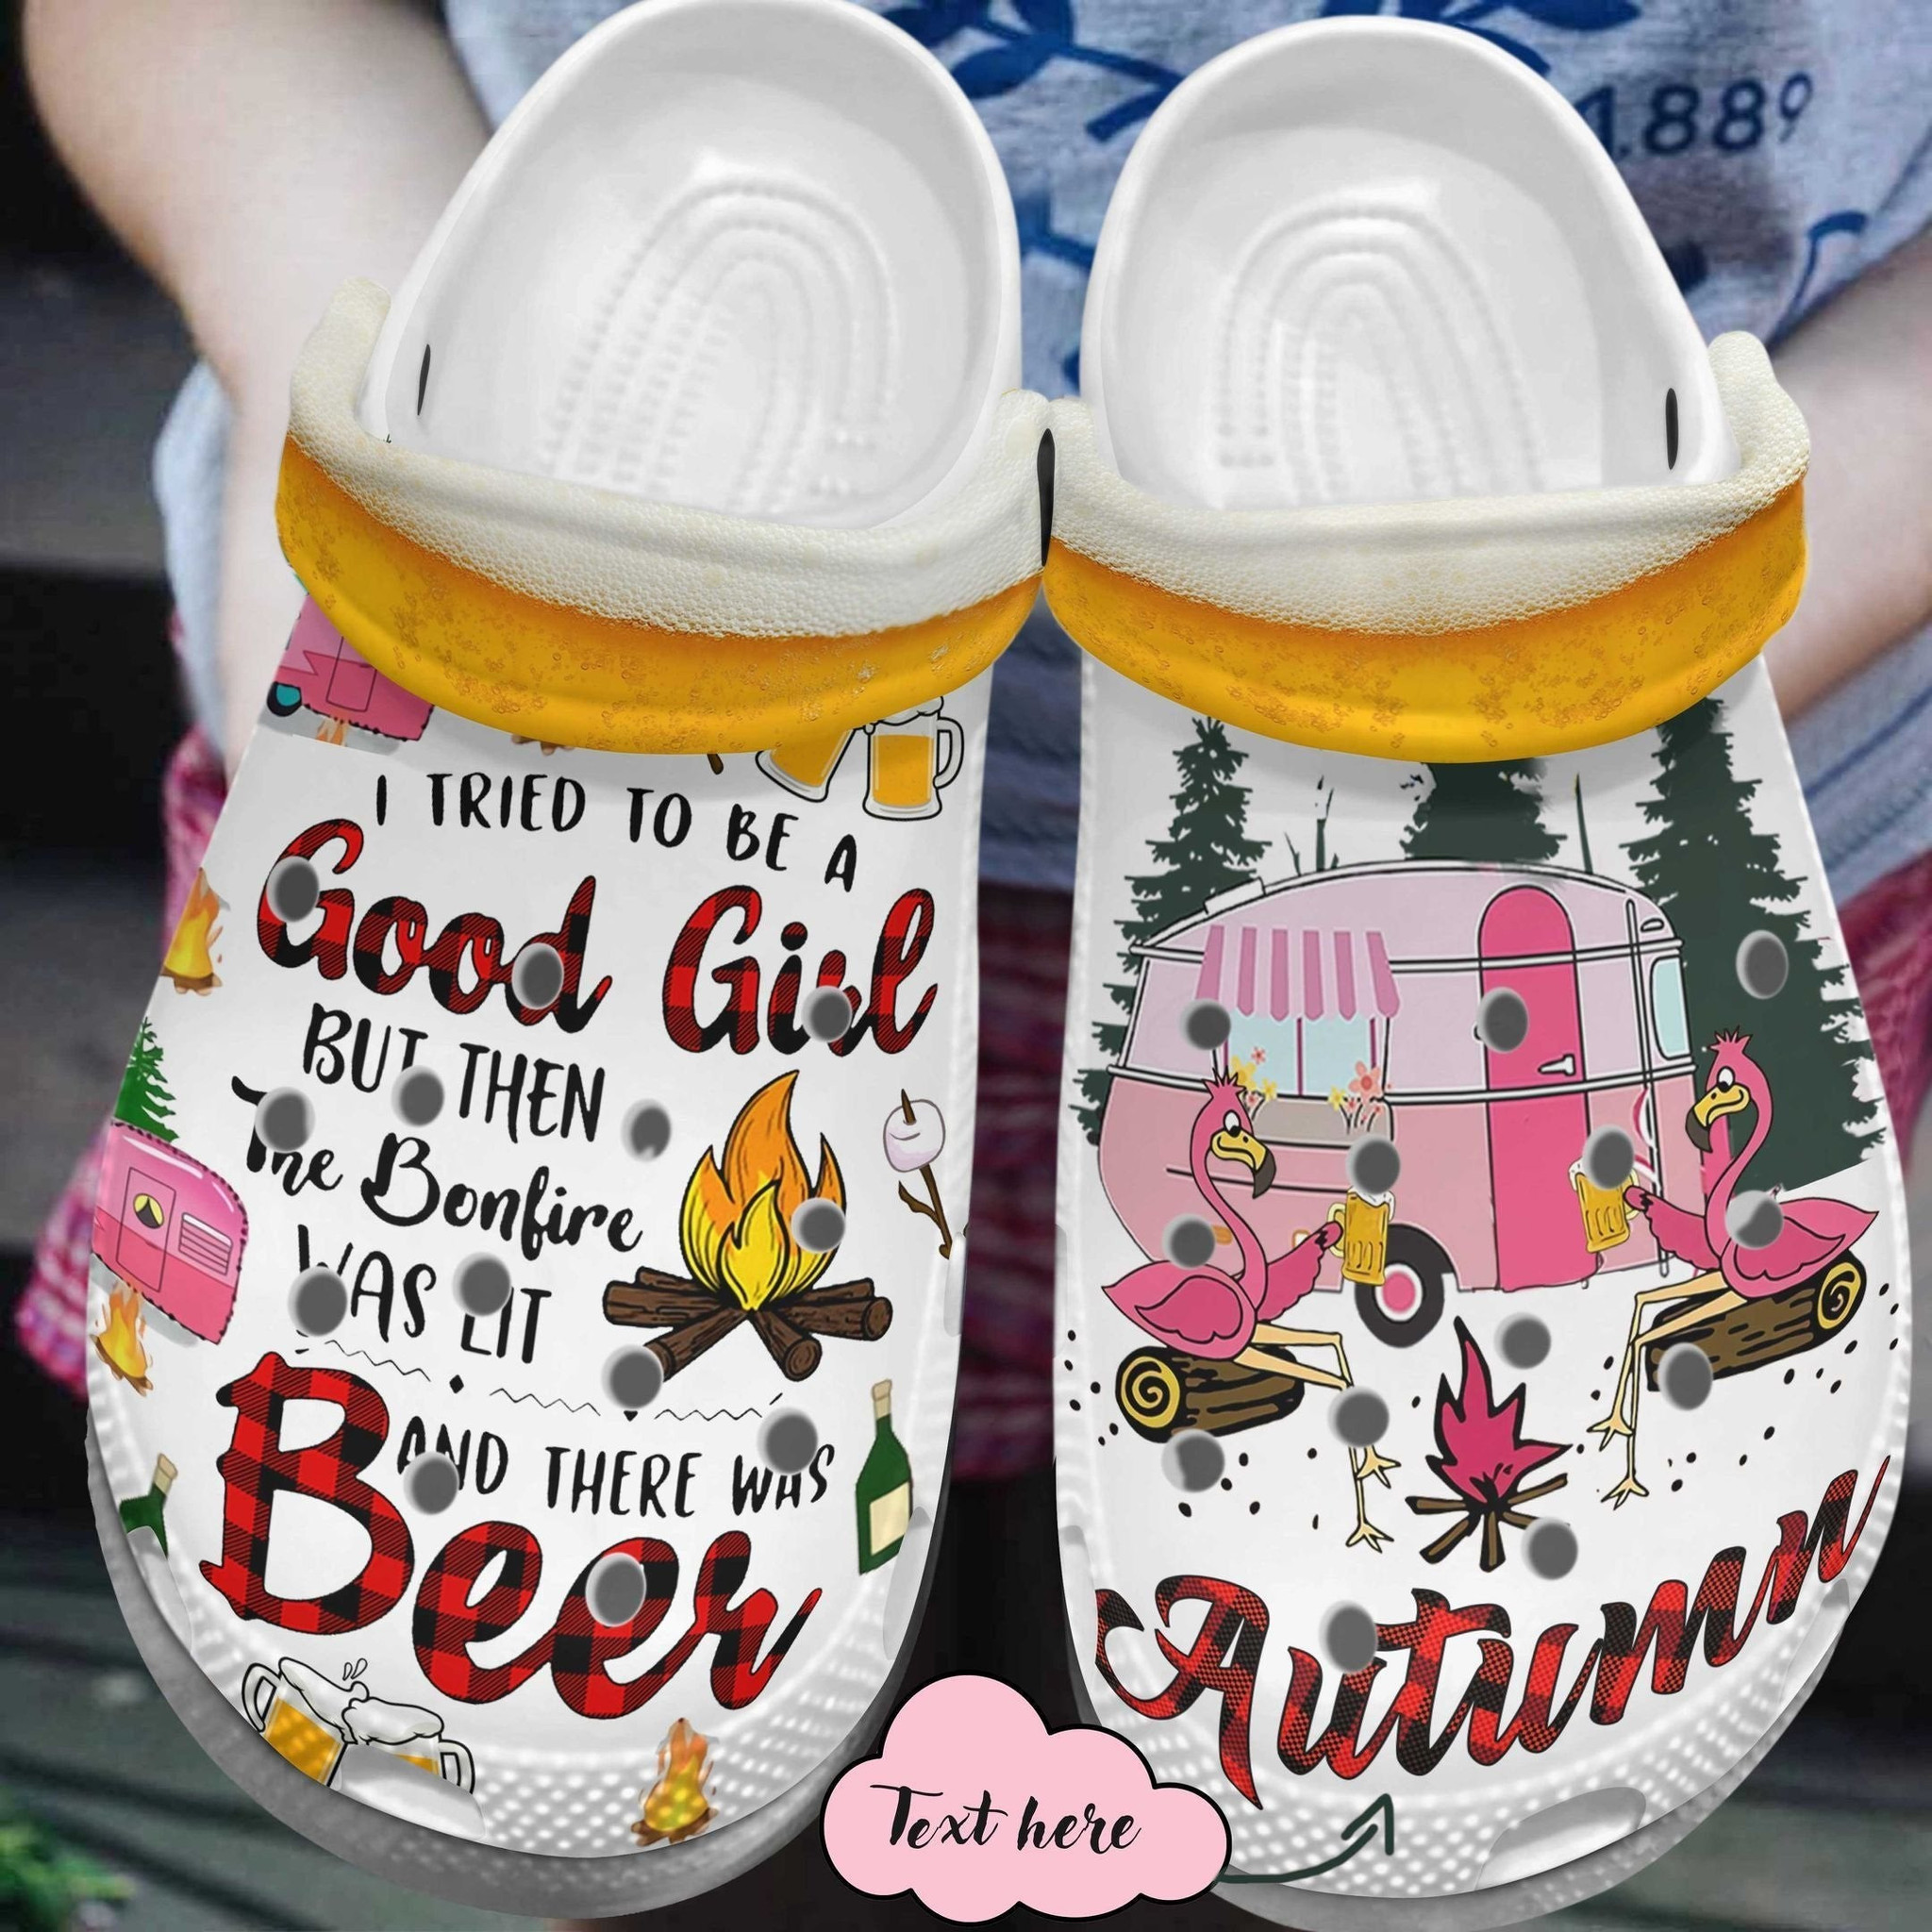 Good Girl And Beer Crocs Shoes - Happy Autumn Crocbland Clogs Birthday Gift